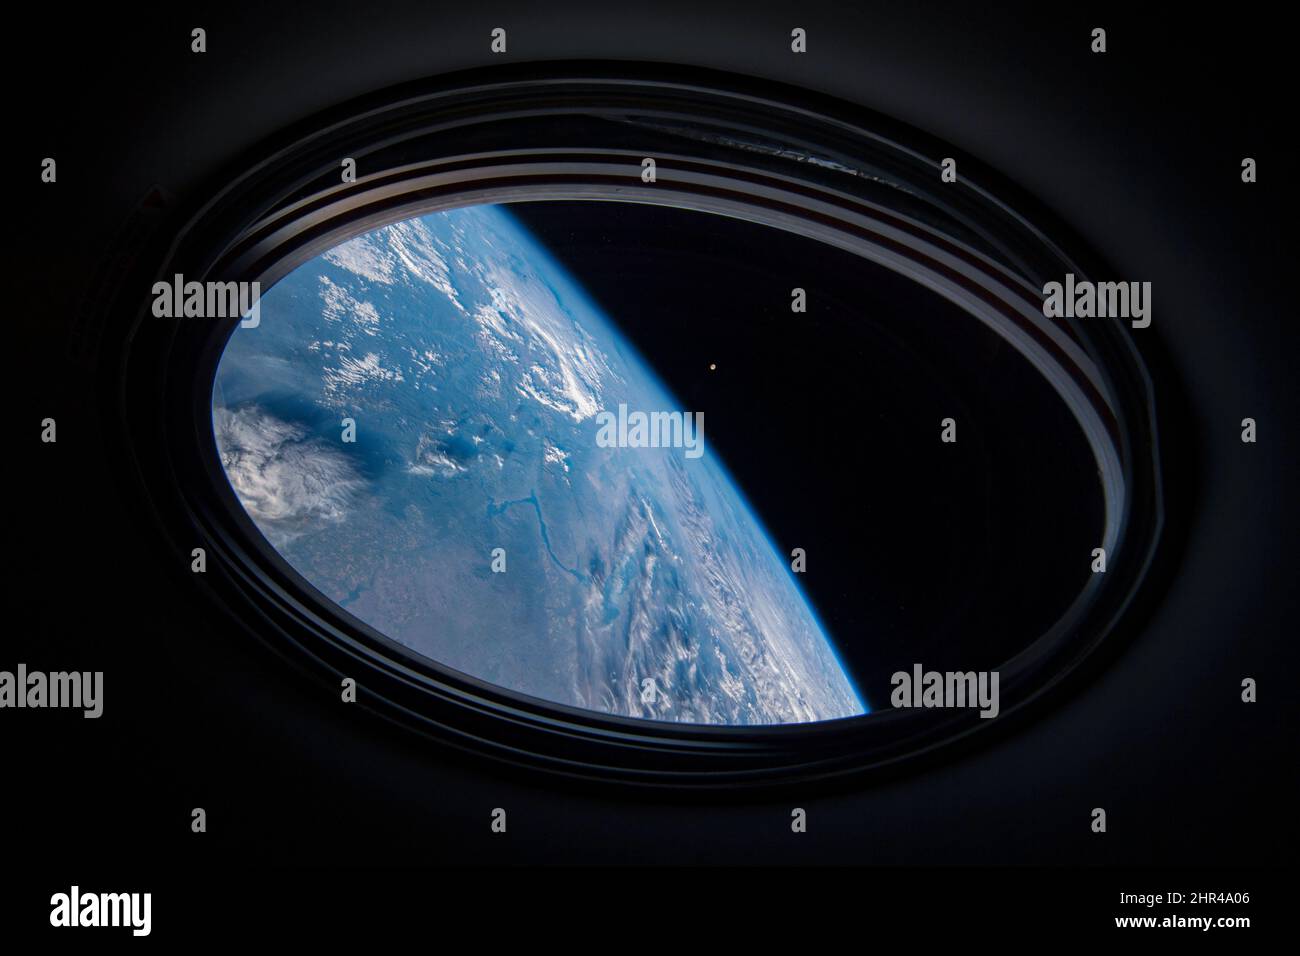 Porthole of spaceship in the outer space, blue earth planet and moon, bull's-eye window view from spacecraft. Elements of this image furnished by NASA Stock Photo